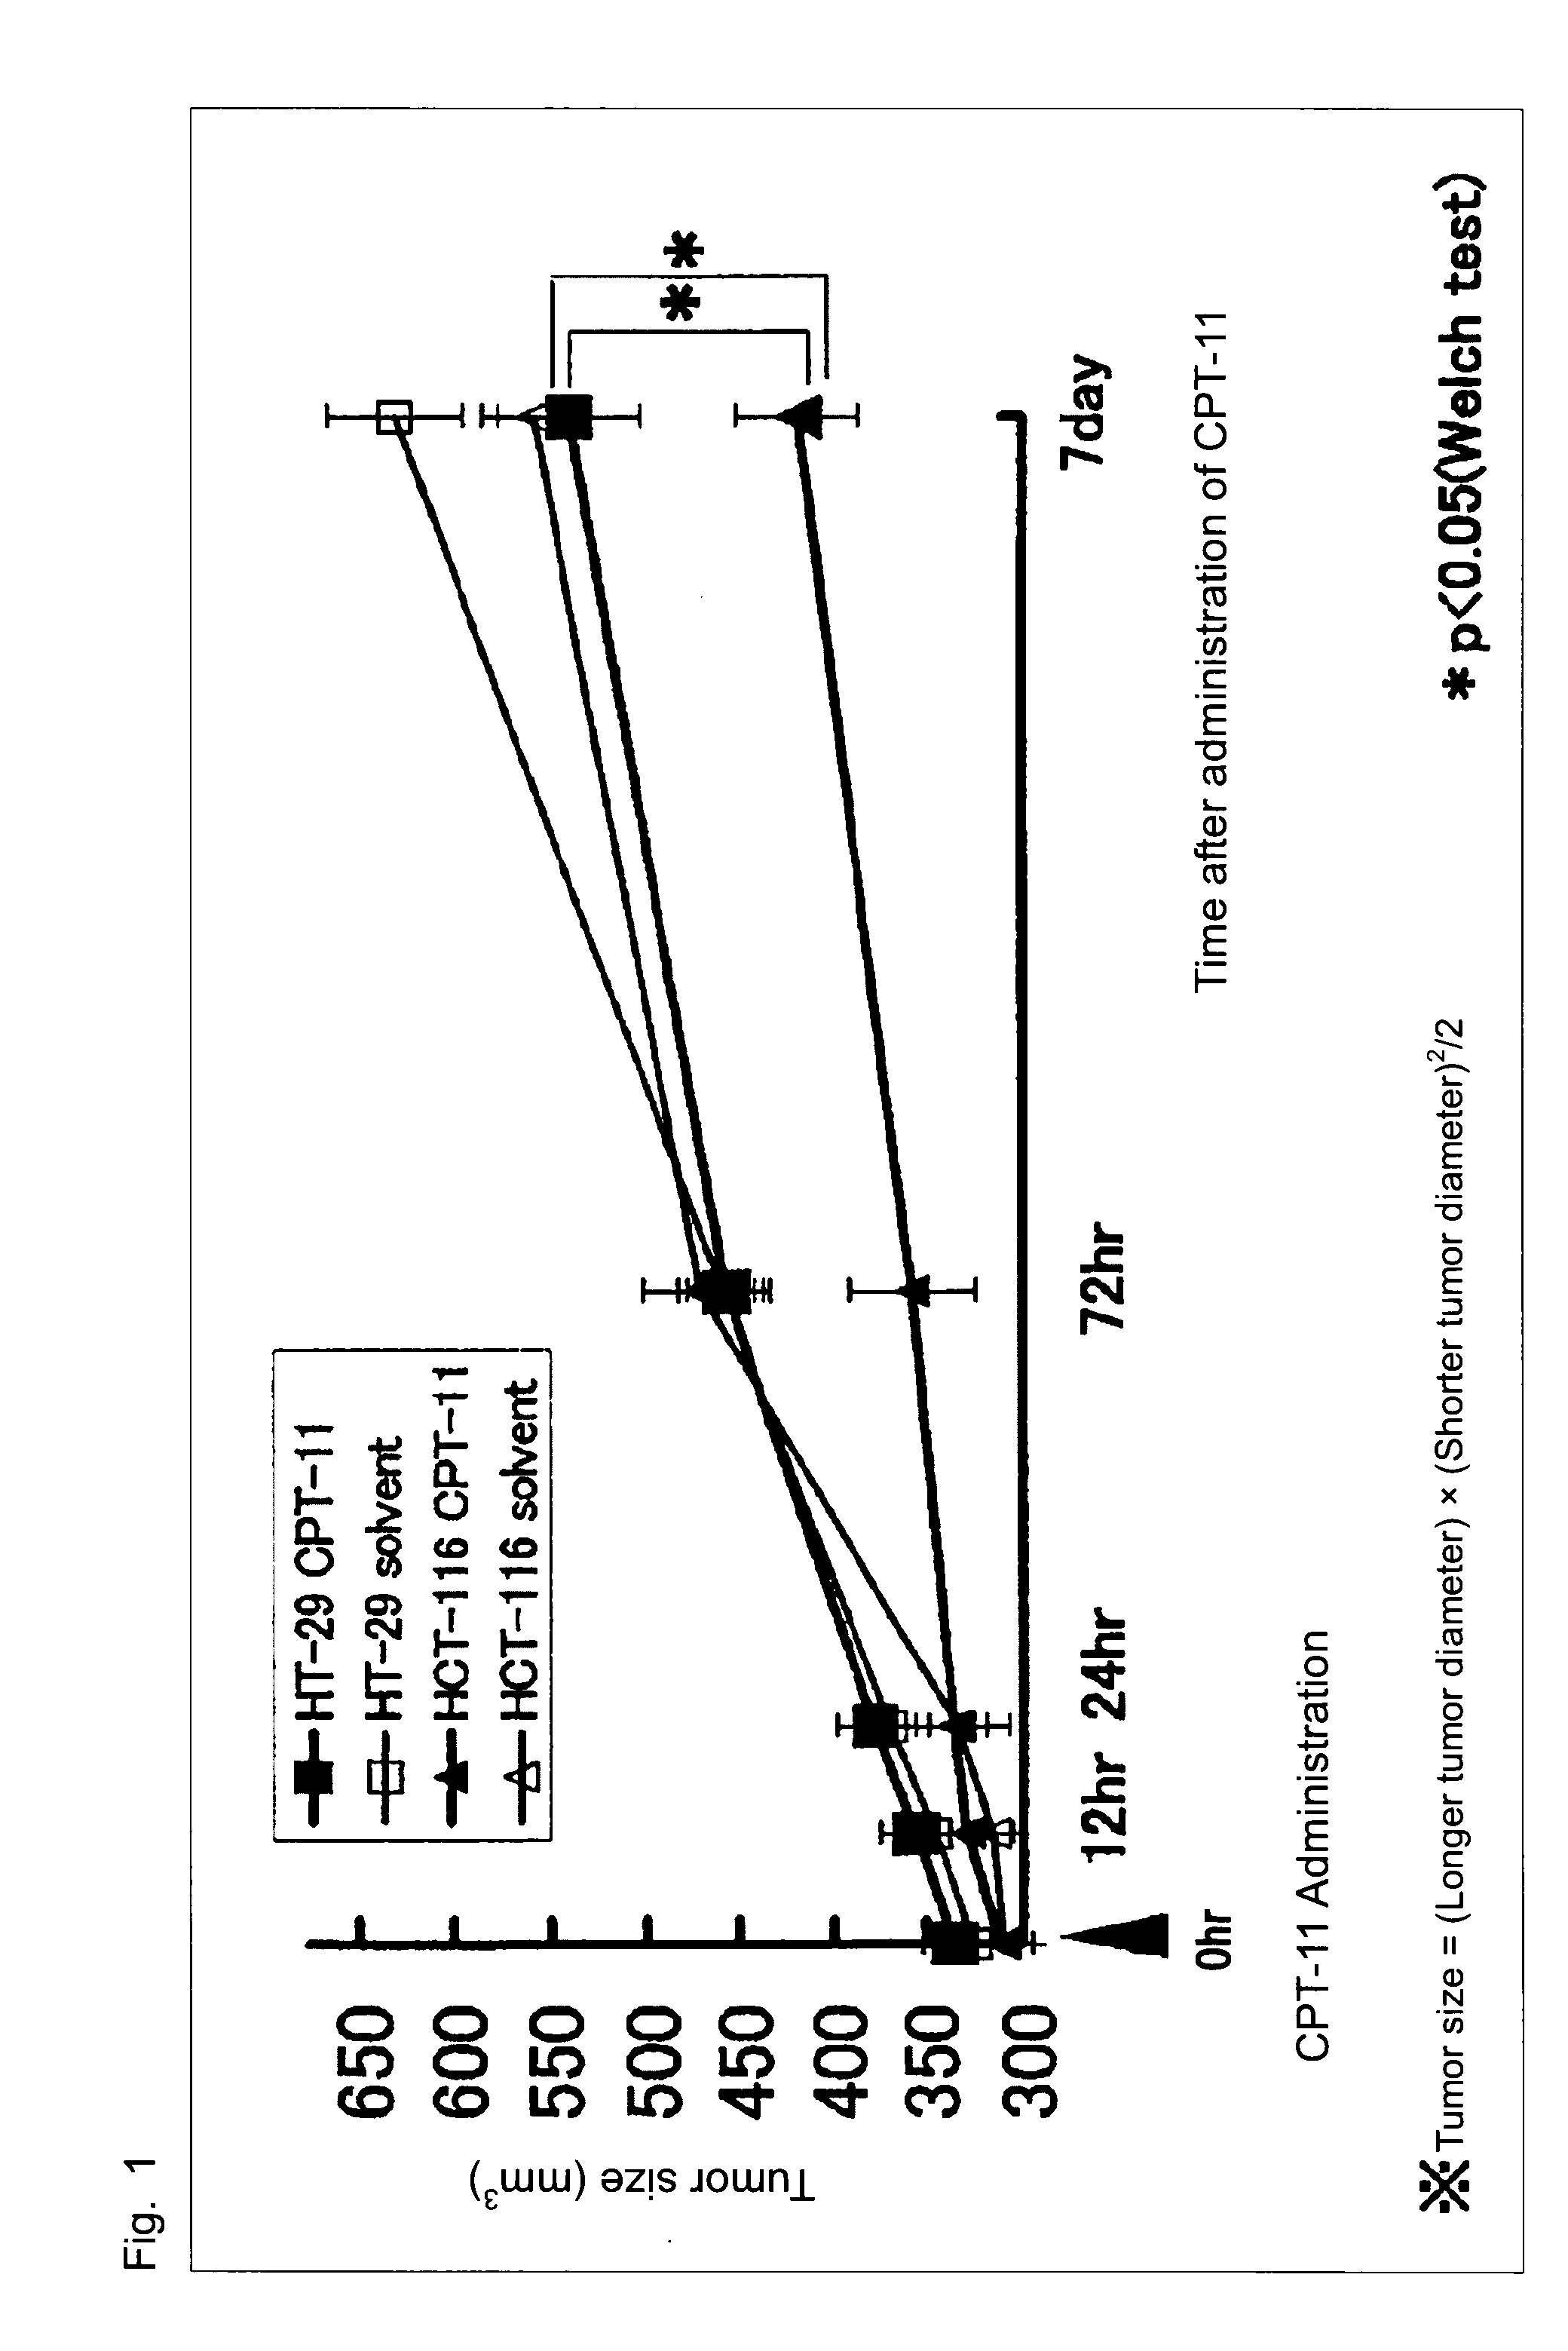 Marker for determination of sensitivity to Anti-cancer agent